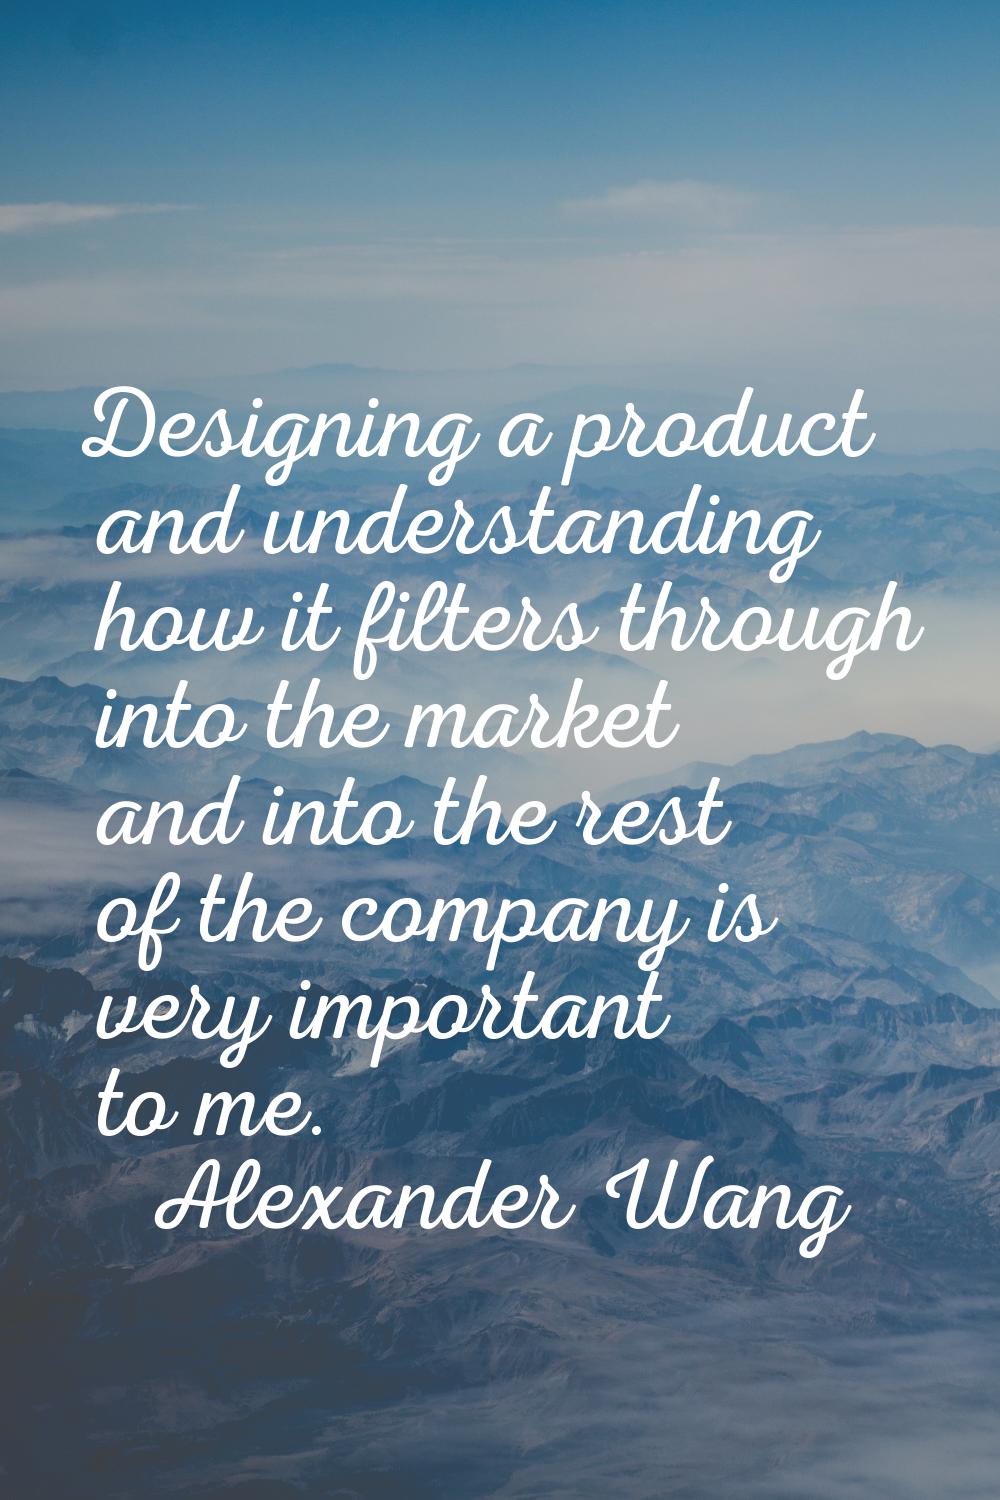 Designing a product and understanding how it filters through into the market and into the rest of t